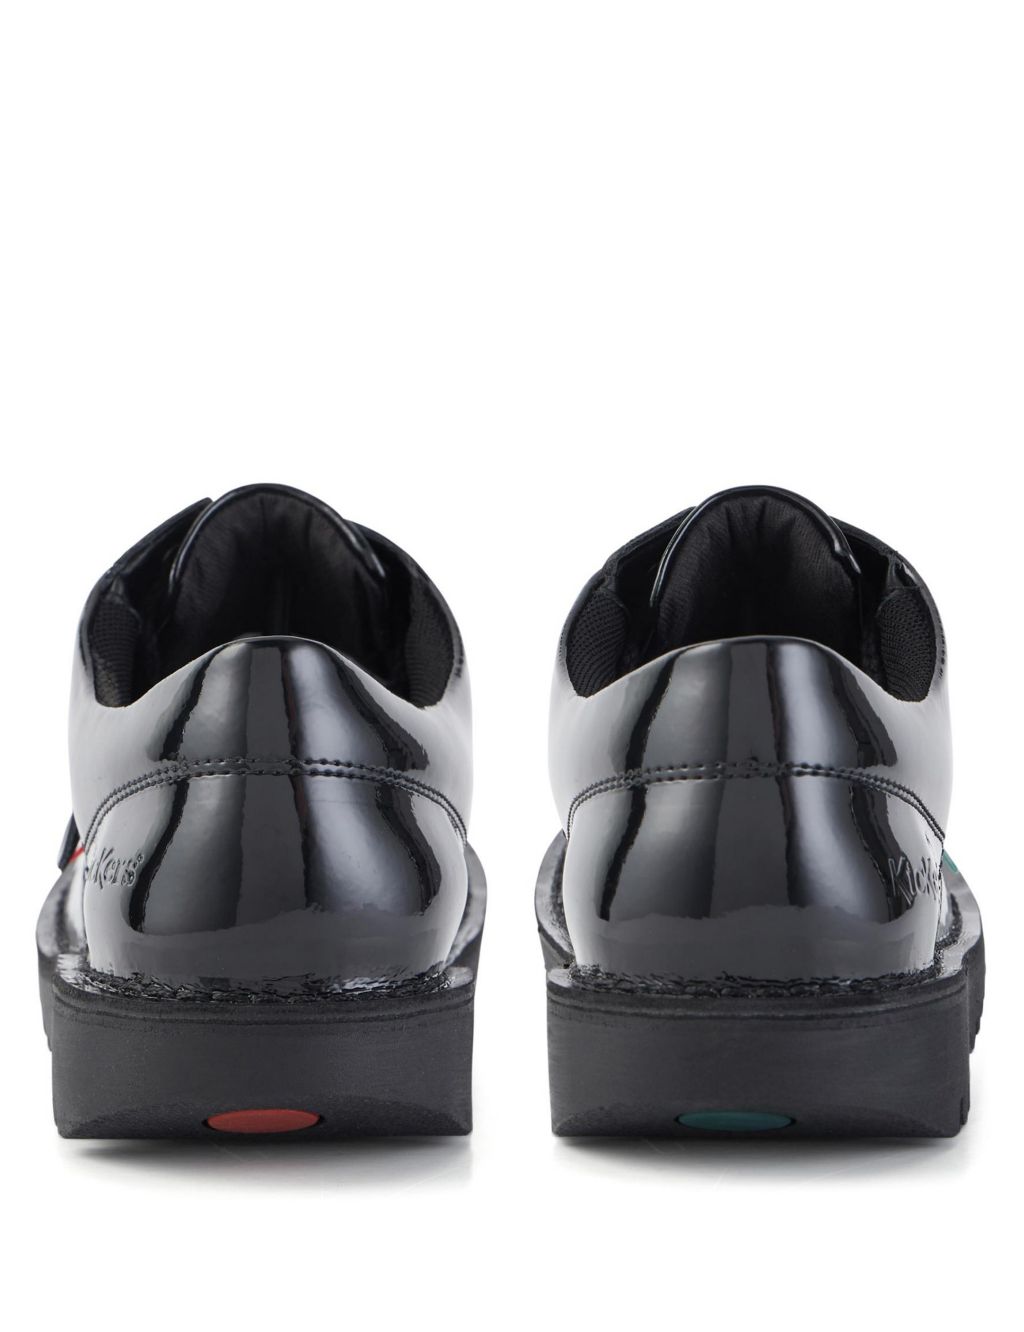 Kids' Patent Leather Lace School Shoes image 2